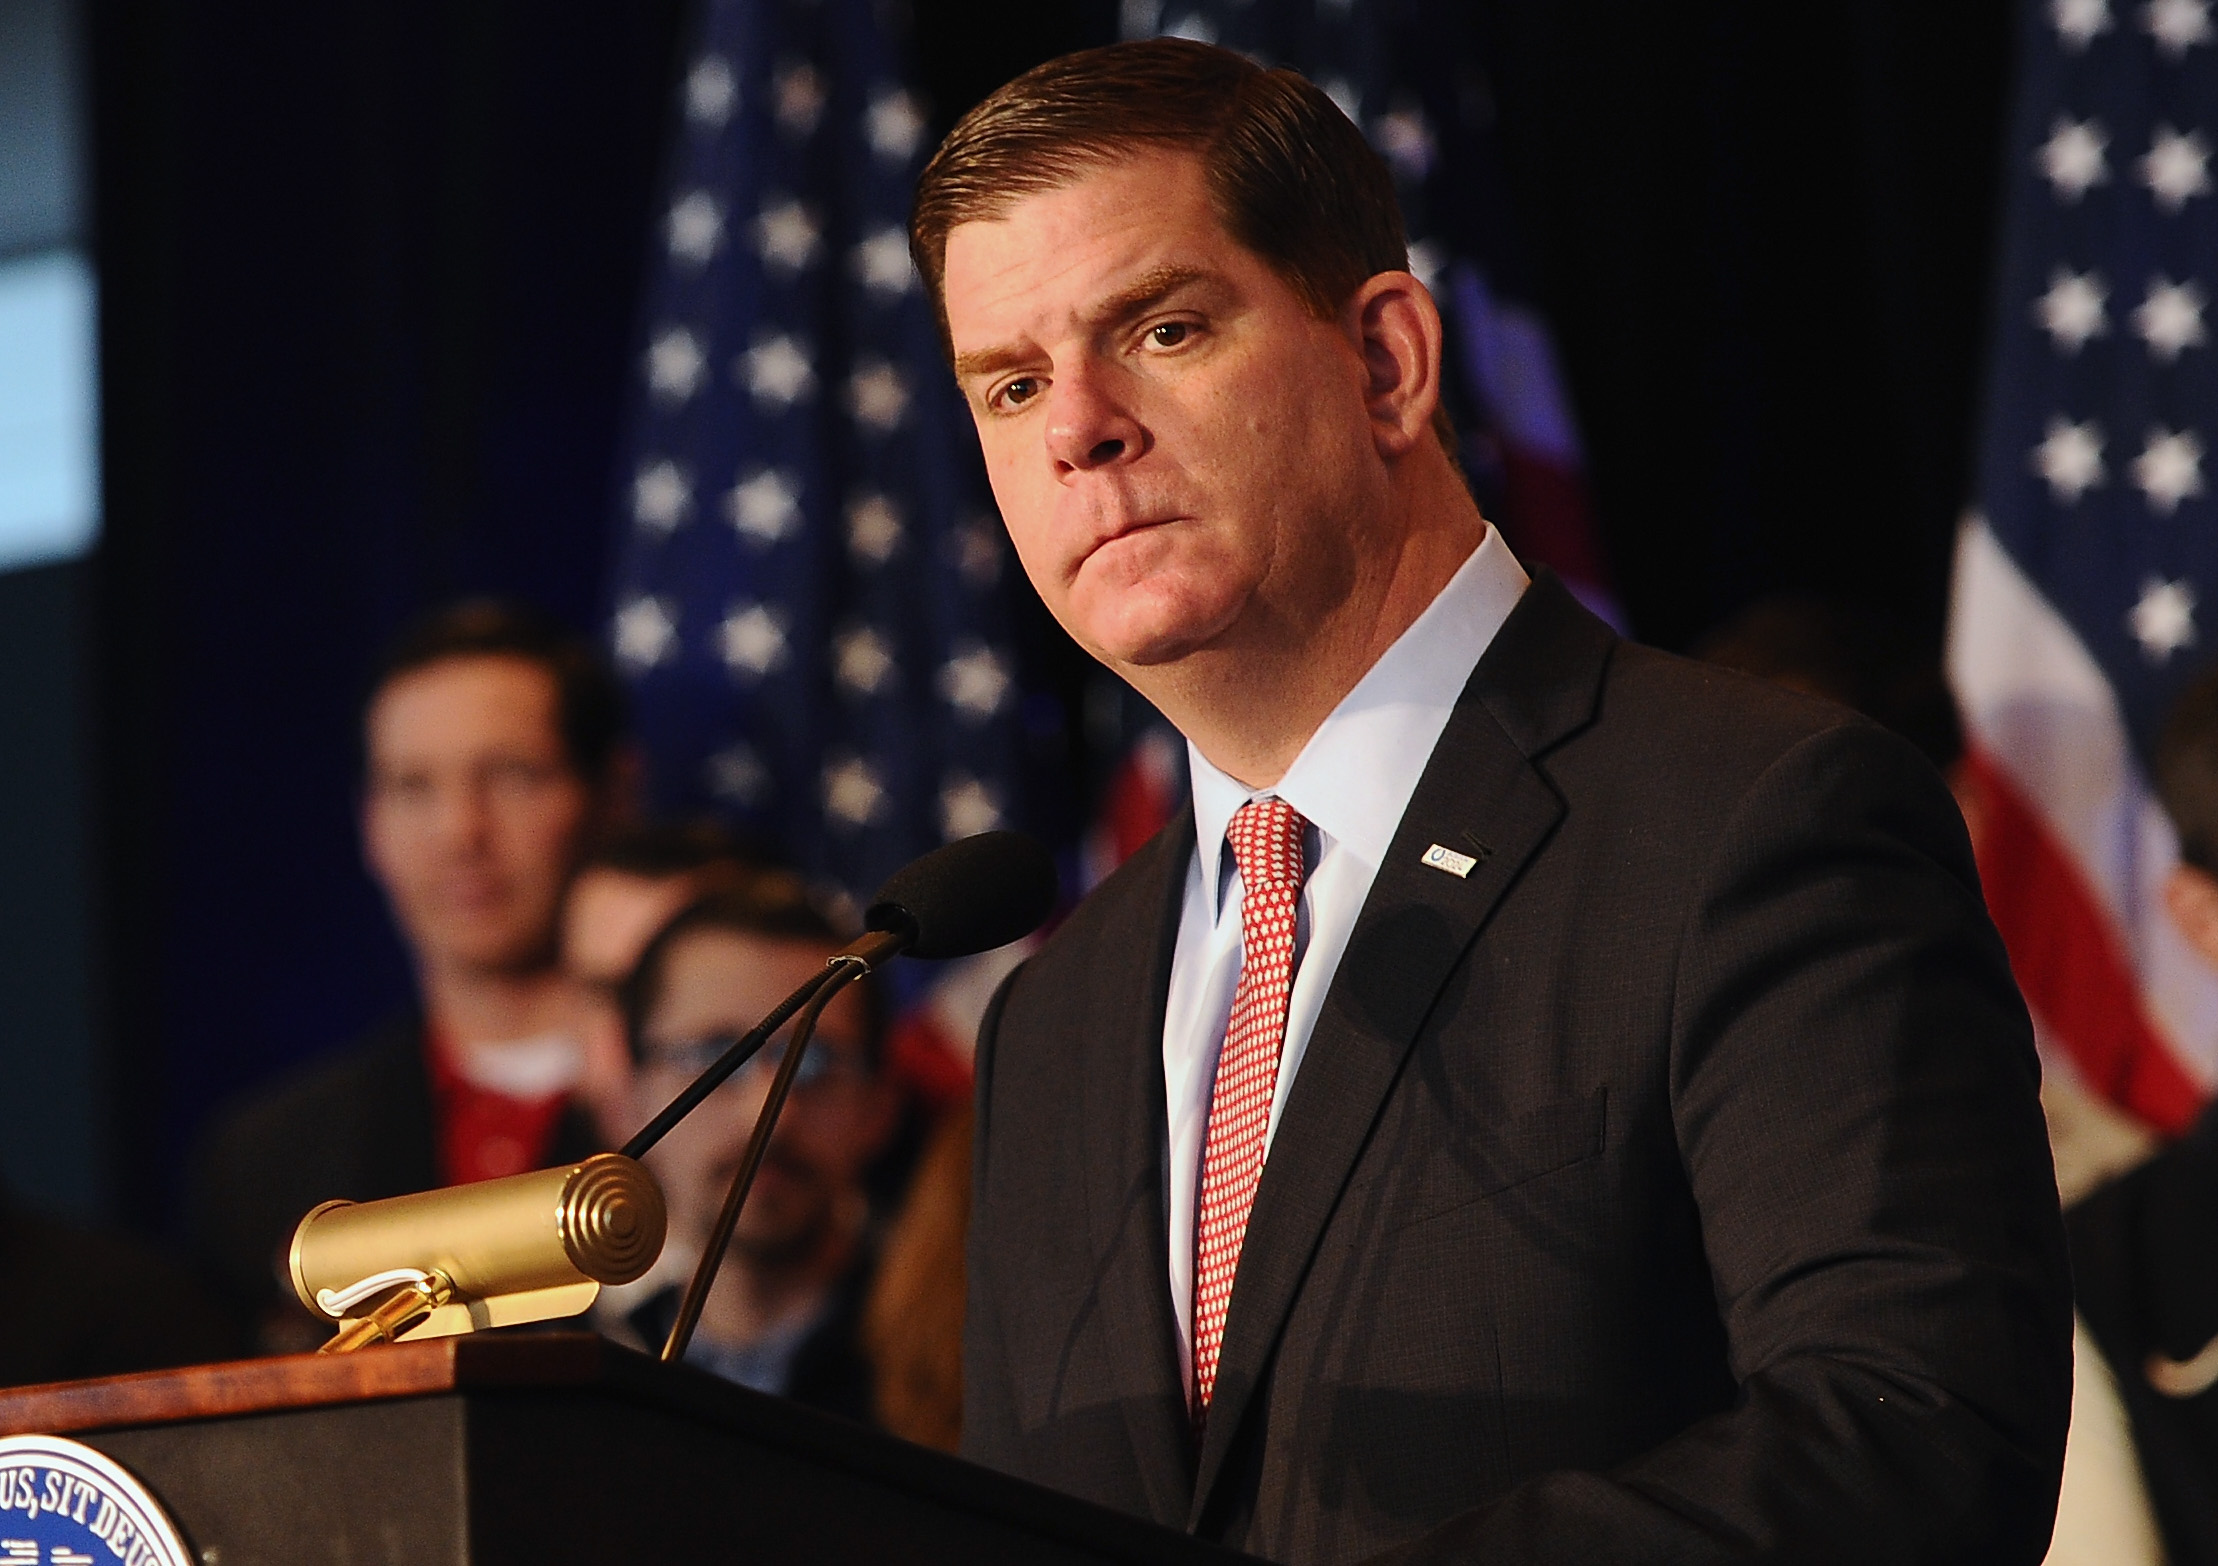 Boston Mayor Martin J. Walsh addresses the media during a press conference to announce Boston as the U.S. applicant city to host the 2024 Olympic and Paralympic Games at the Boston Convention and Exhibition Center on Jan. 9, 2015 in Boston